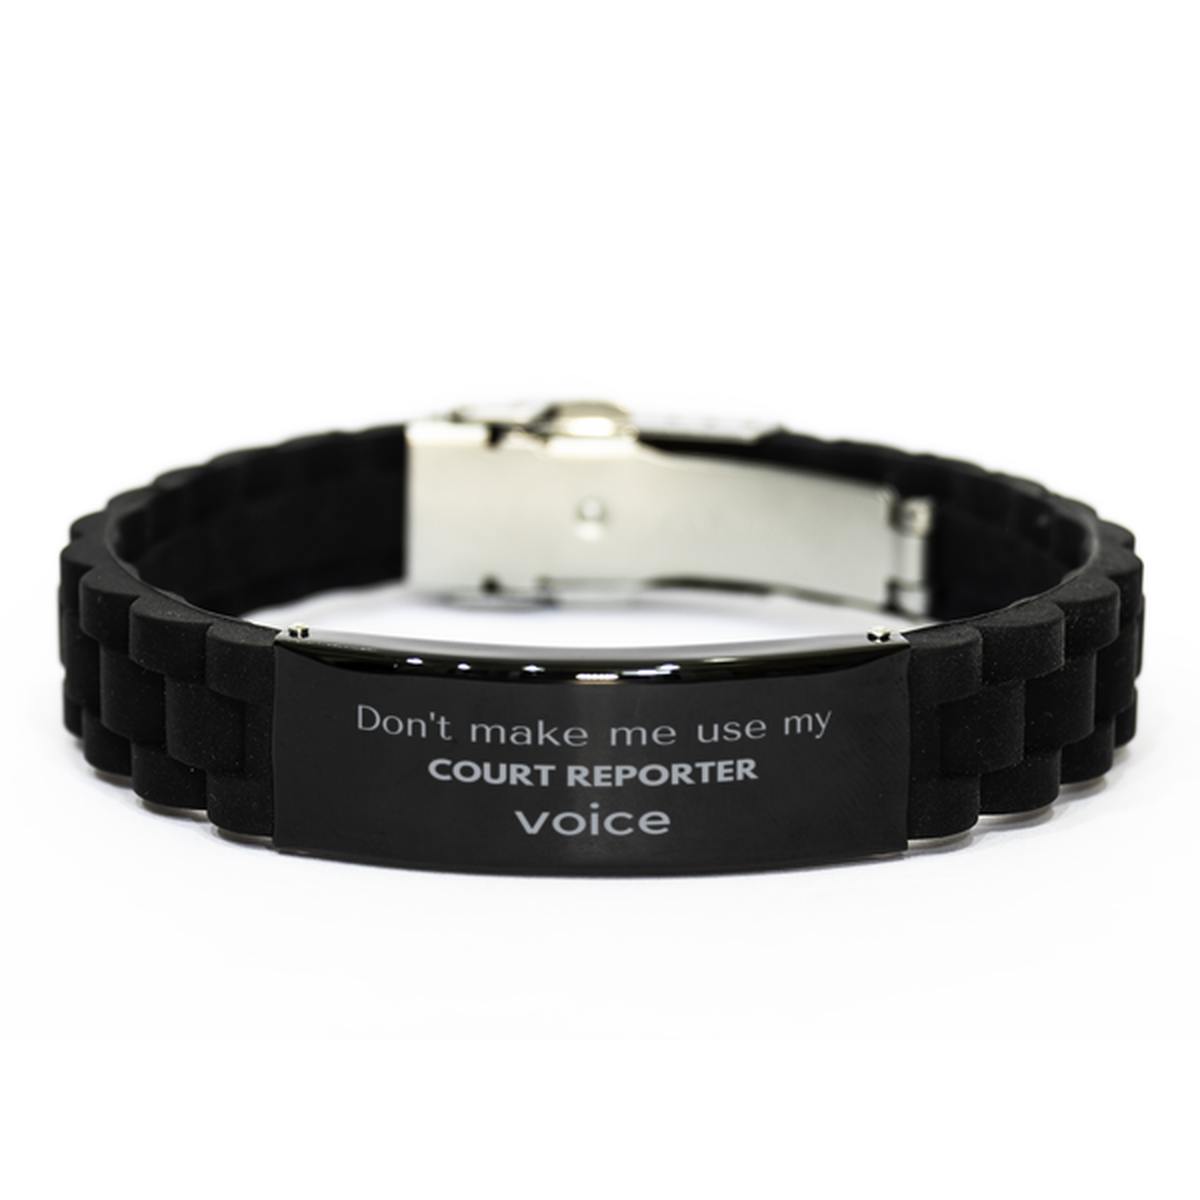 Don't make me use my Court Reporter voice, Sarcasm Court Reporter Gifts, Christmas Court Reporter Black Glidelock Clasp Bracelet Birthday Unique Gifts For Court Reporter Coworkers, Men, Women, Colleague, Friends